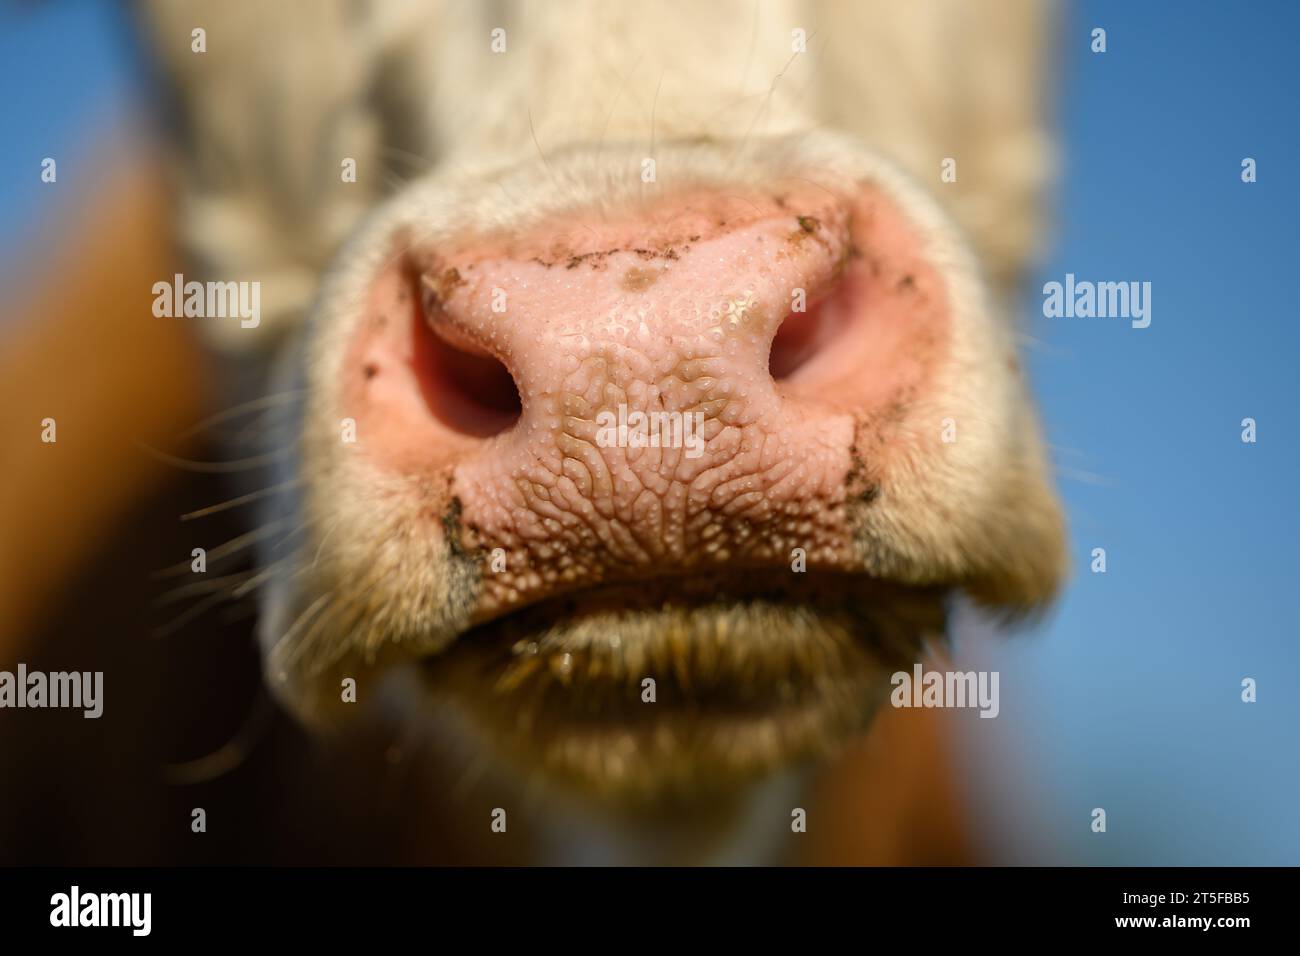 White cow close up portrait on pasture. Oversized and pink cow nose. Stock Photo